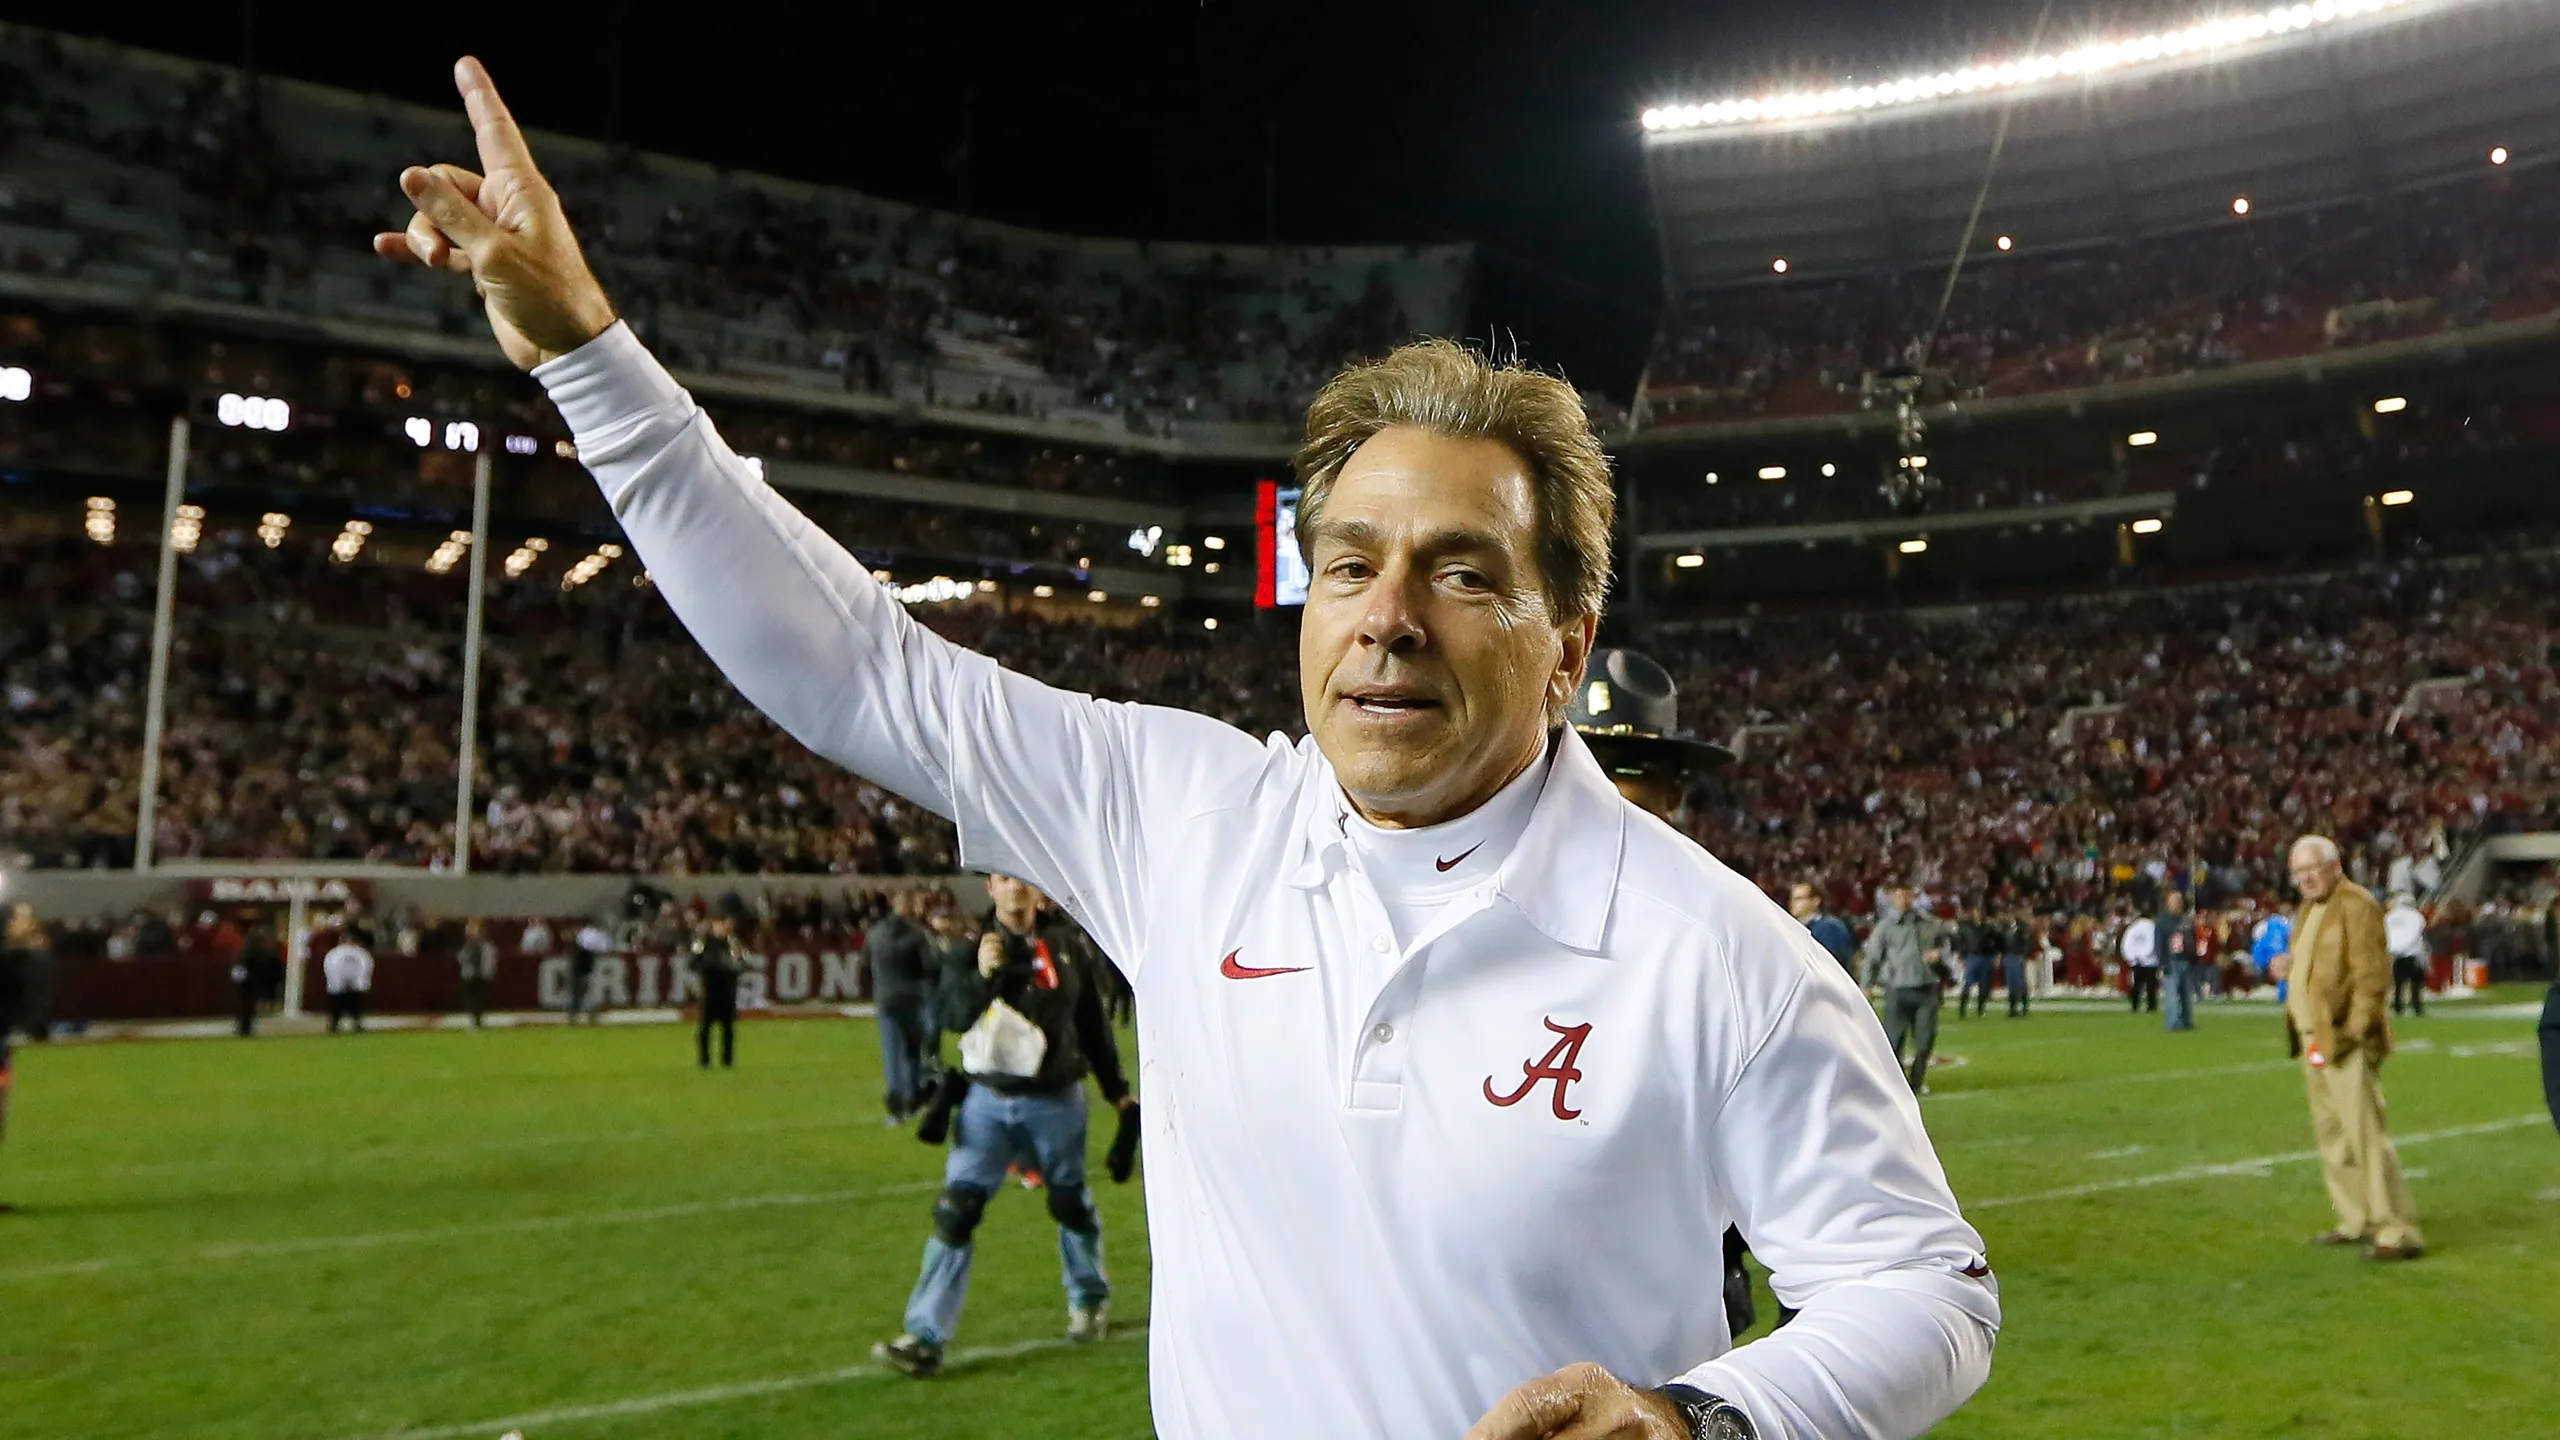 The Irony of Loss How Nick Saban's Alabama Dynasty Faces Its Toughest Challenge Yet..